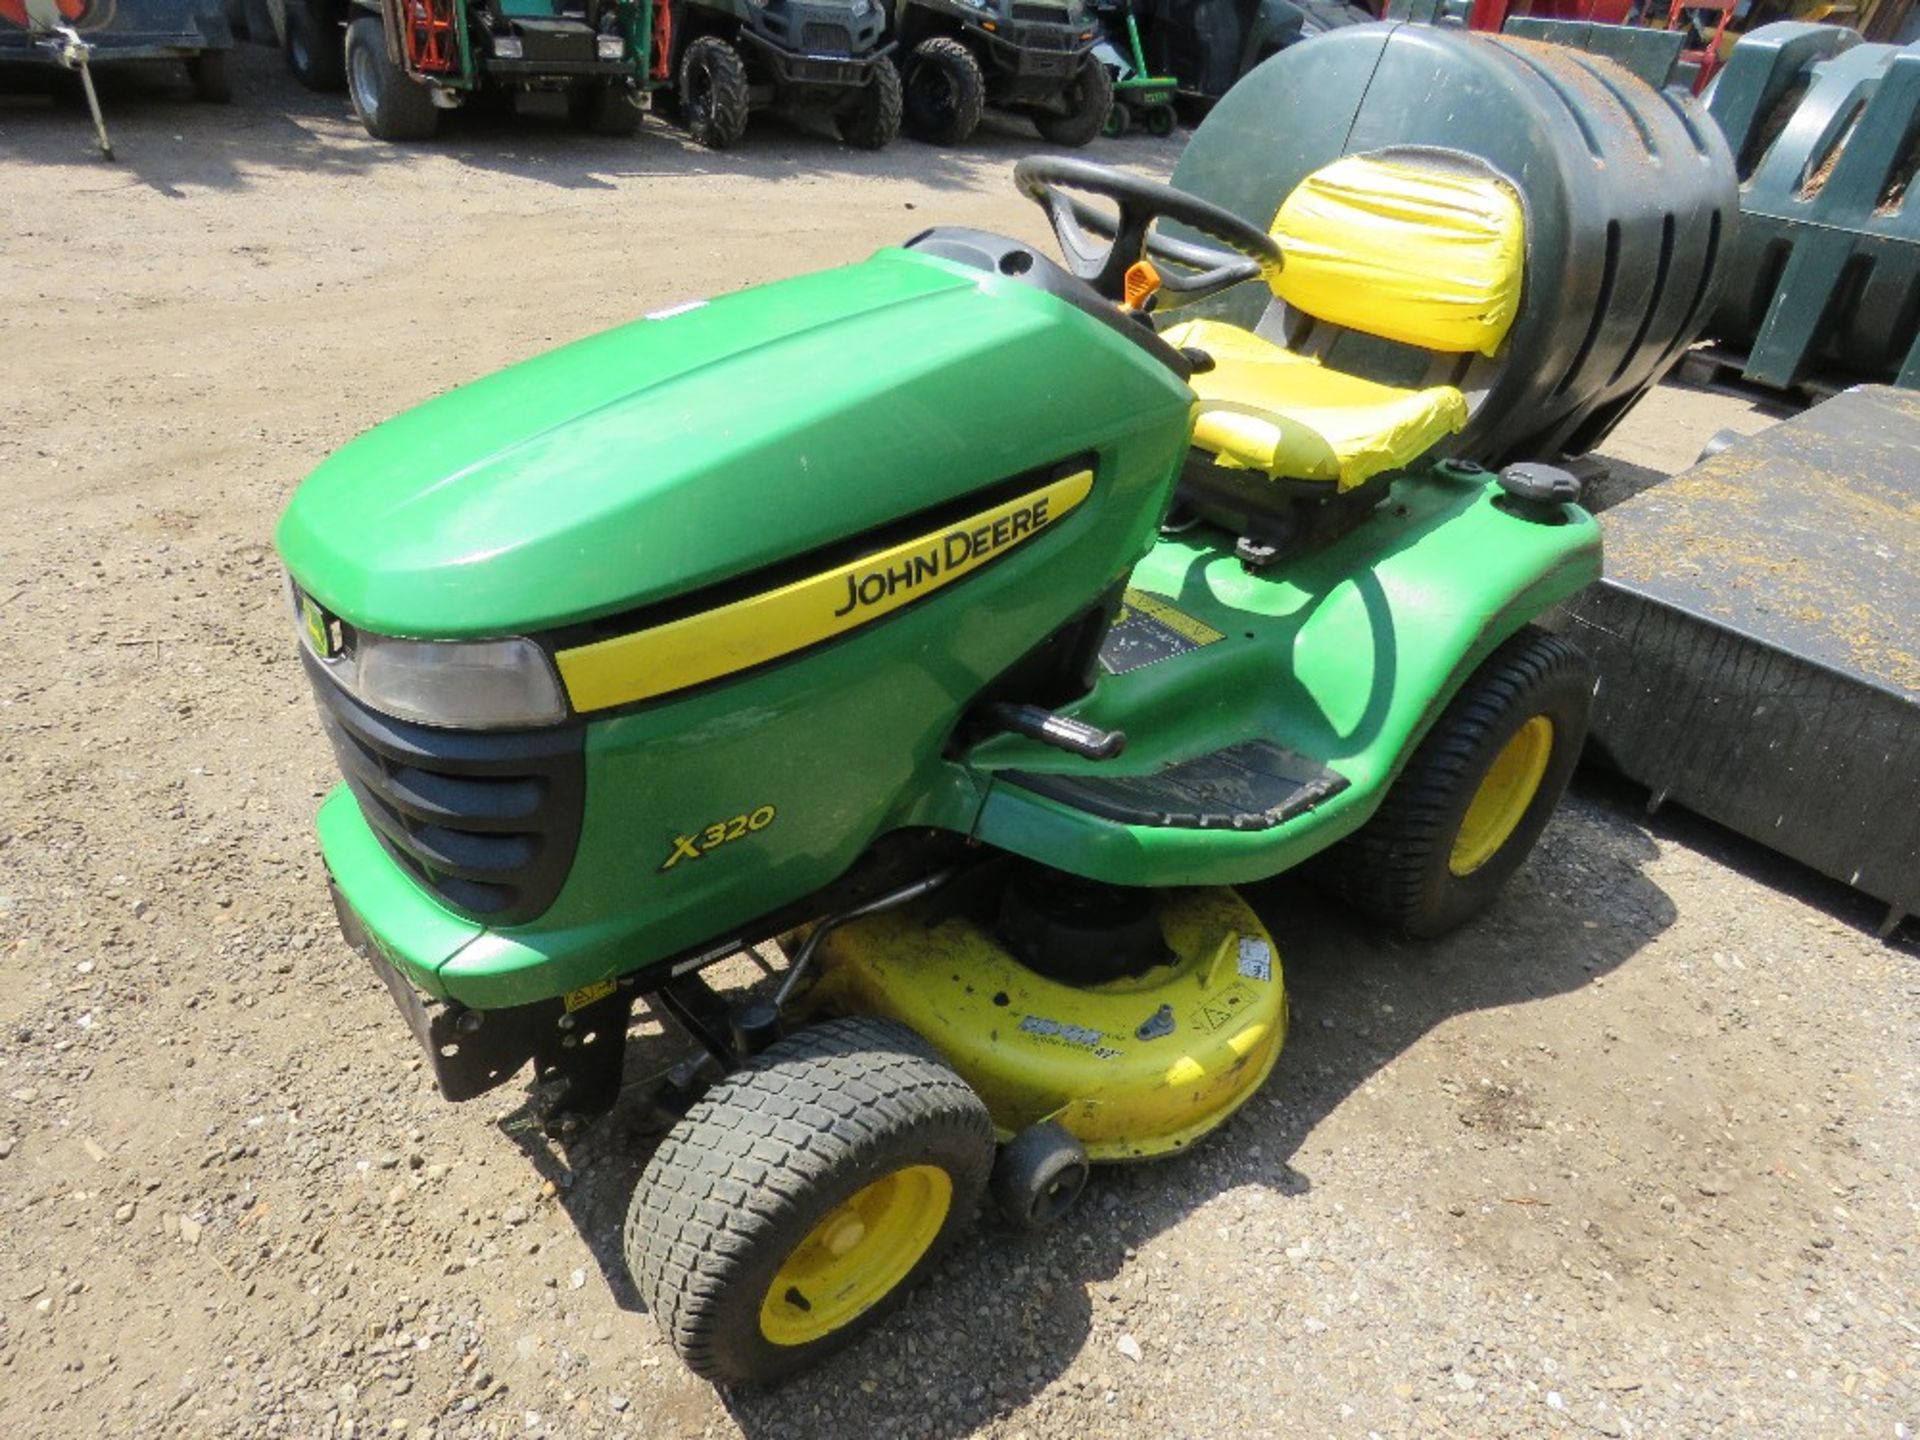 JOHN DEERE X320 PETROL RIDE ON MOWER, 756 REC HOURS. RUNS AND DRIVES BUT MOWERS NOT ENGAGING...NO BE - Image 2 of 11